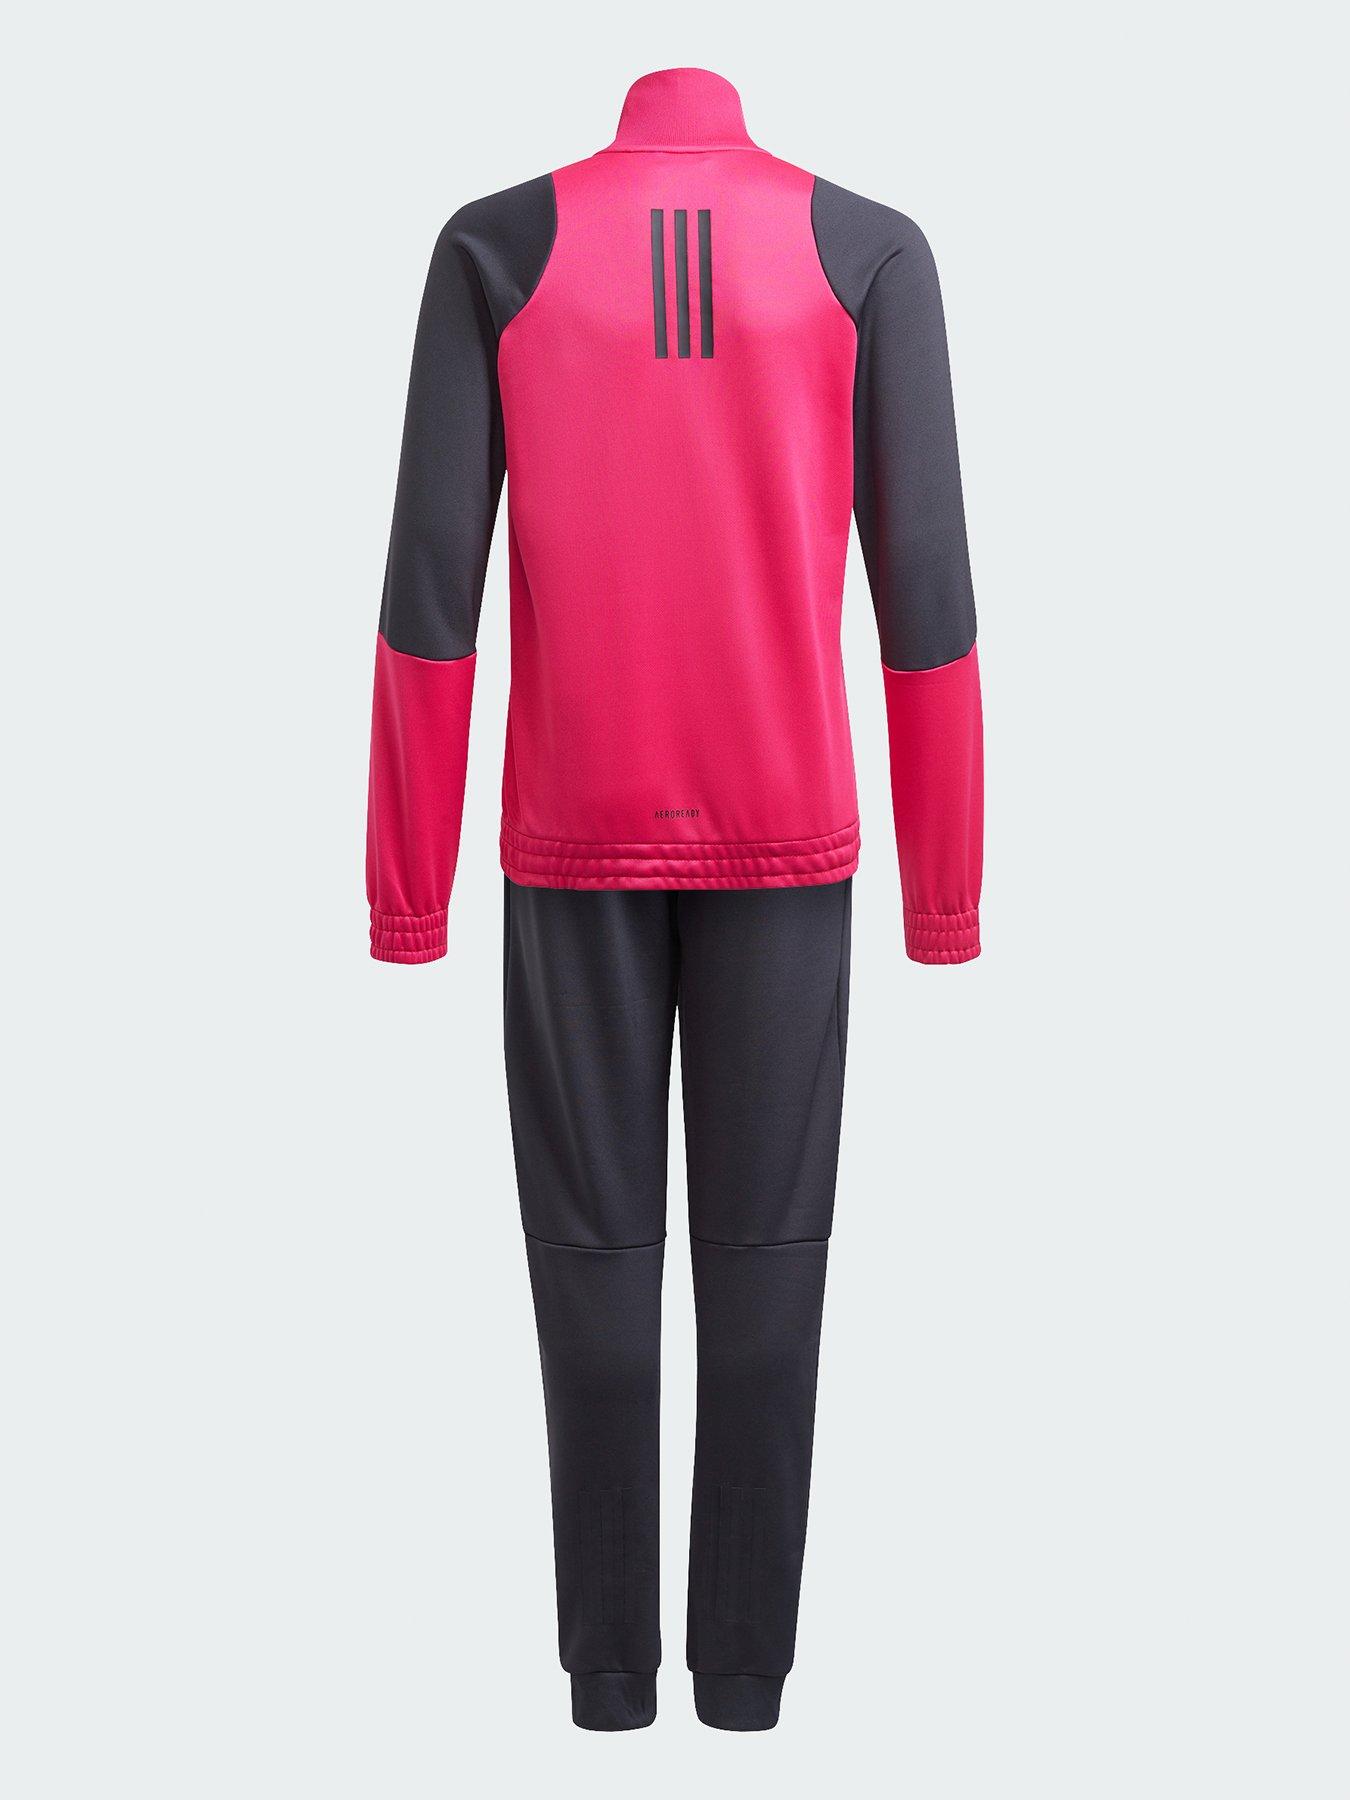 Baby Clothes Junior Girls XFG Tracksuit - Black/Pink